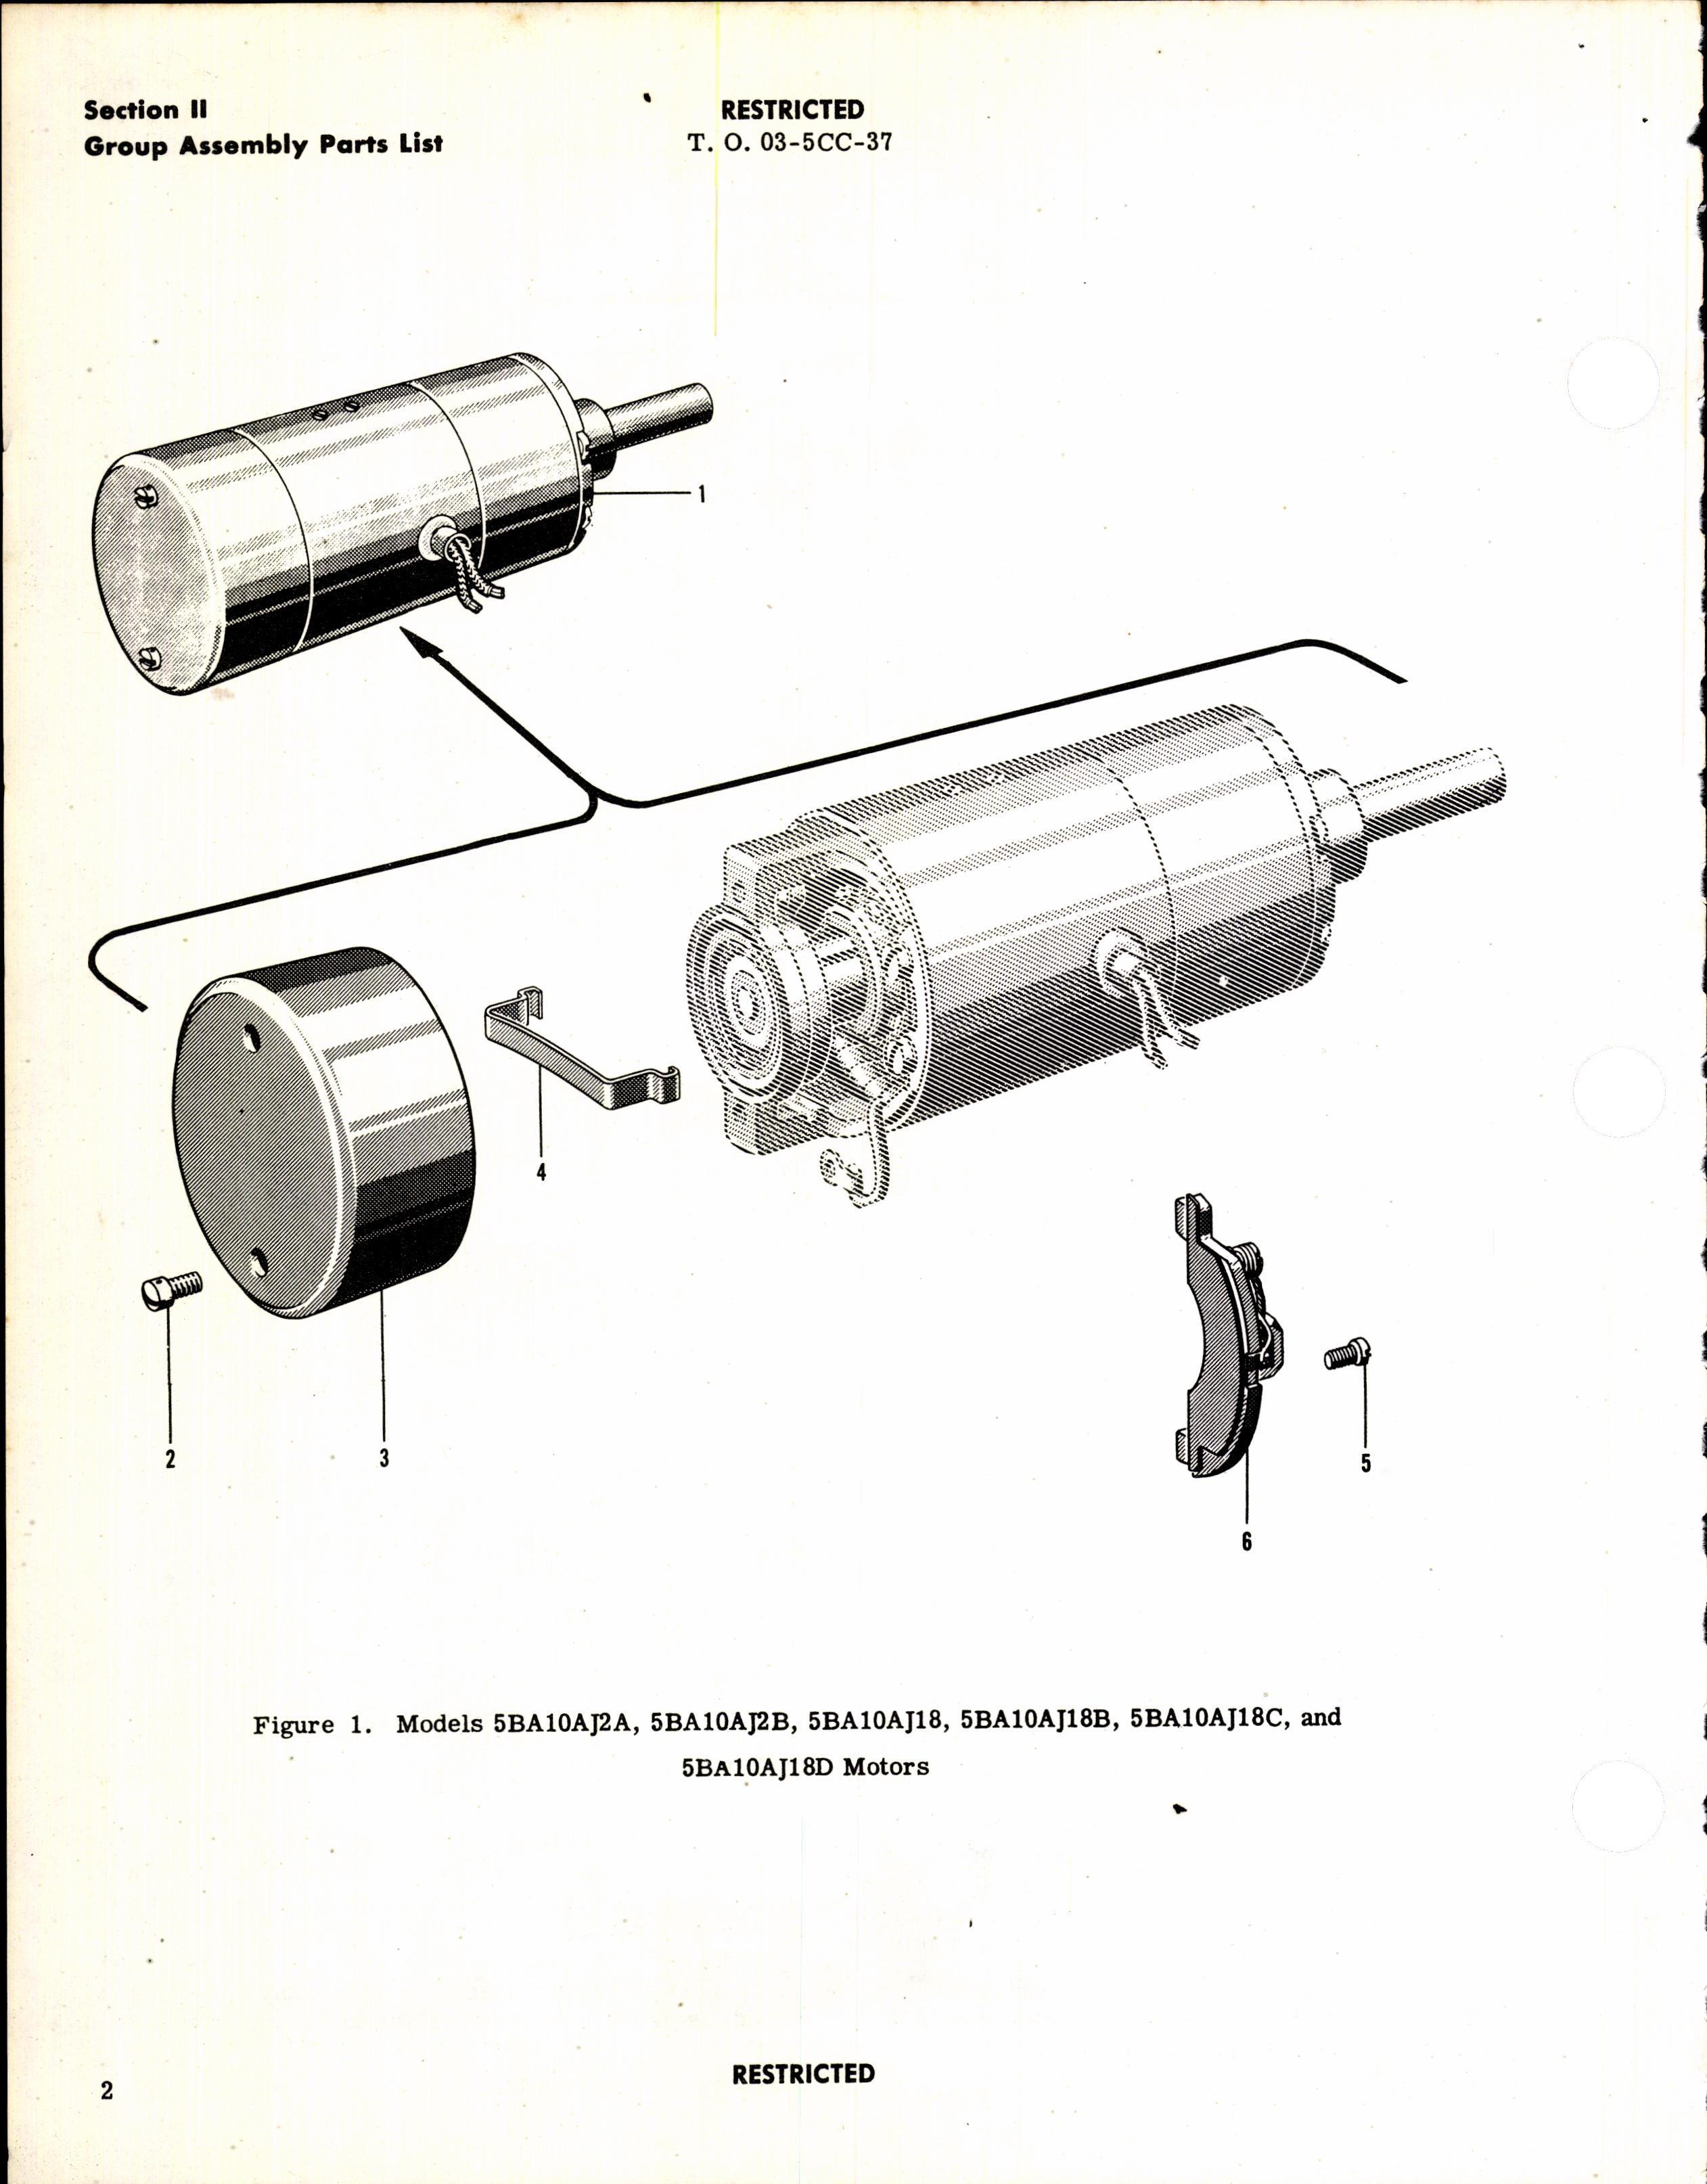 Sample page 4 from AirCorps Library document: Parts Catalog for General Electric Aircraft Motors, Series 5BA10